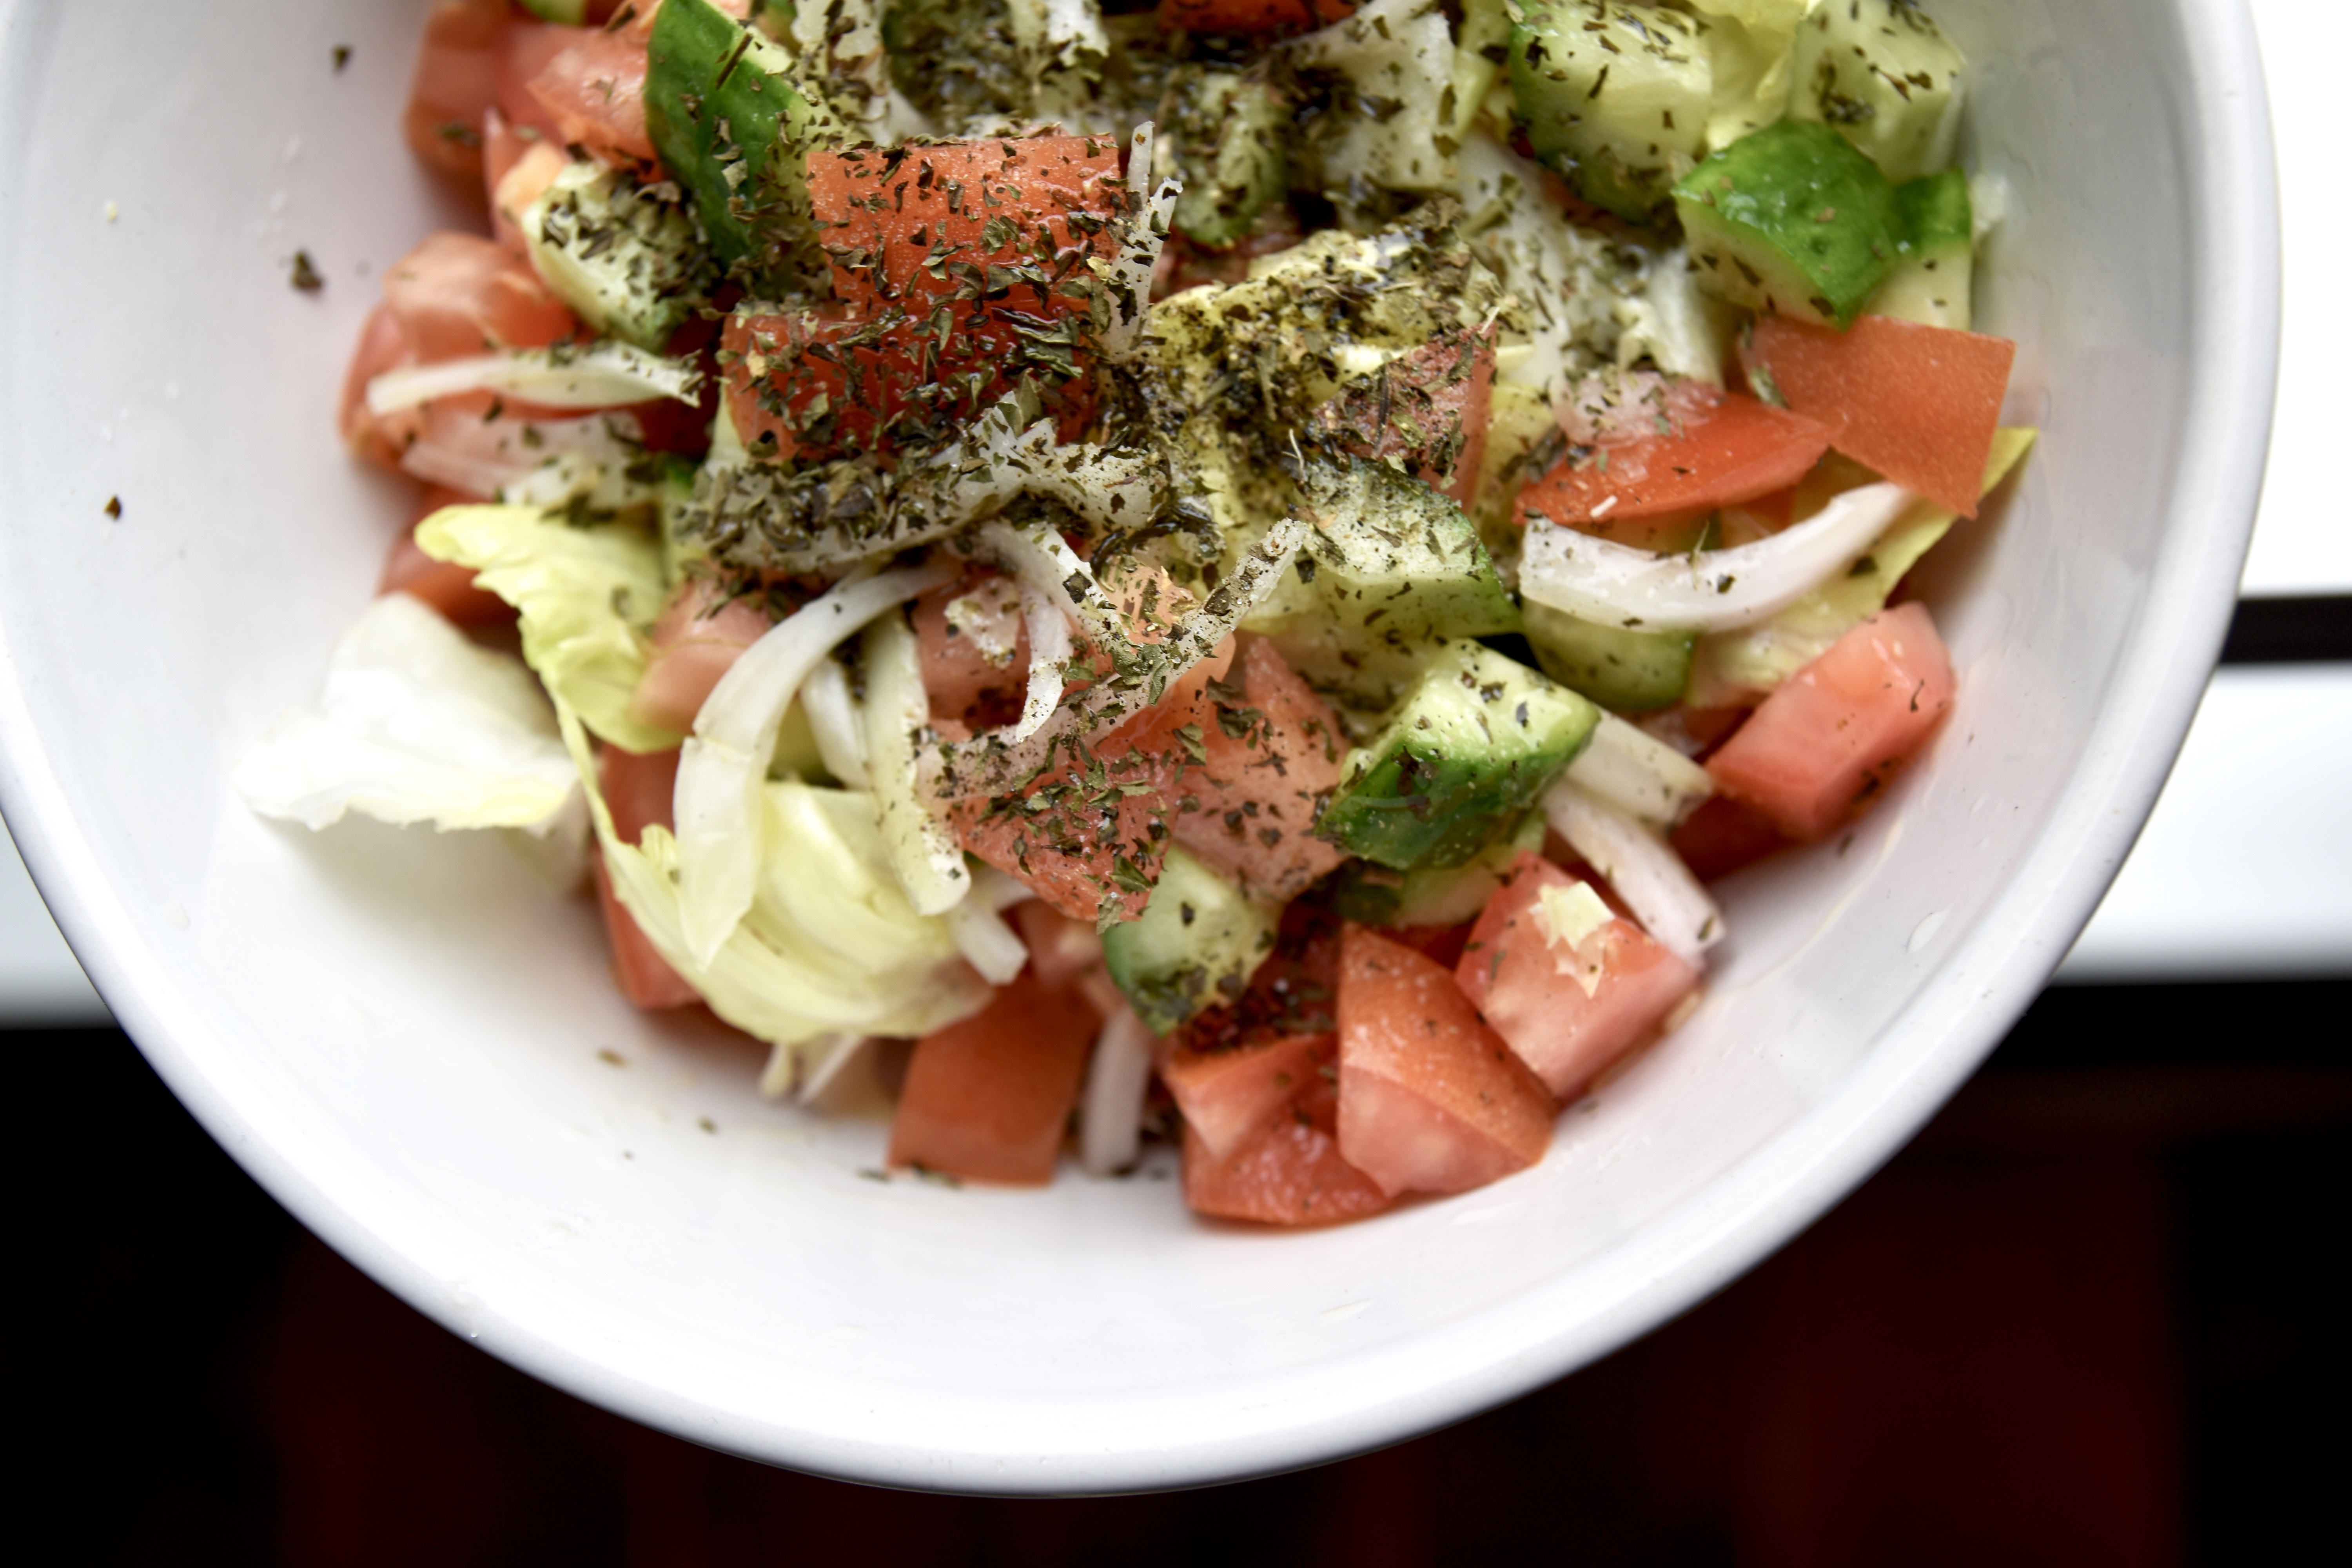 A MIDDLE EASTERN SIMPLE SALAD